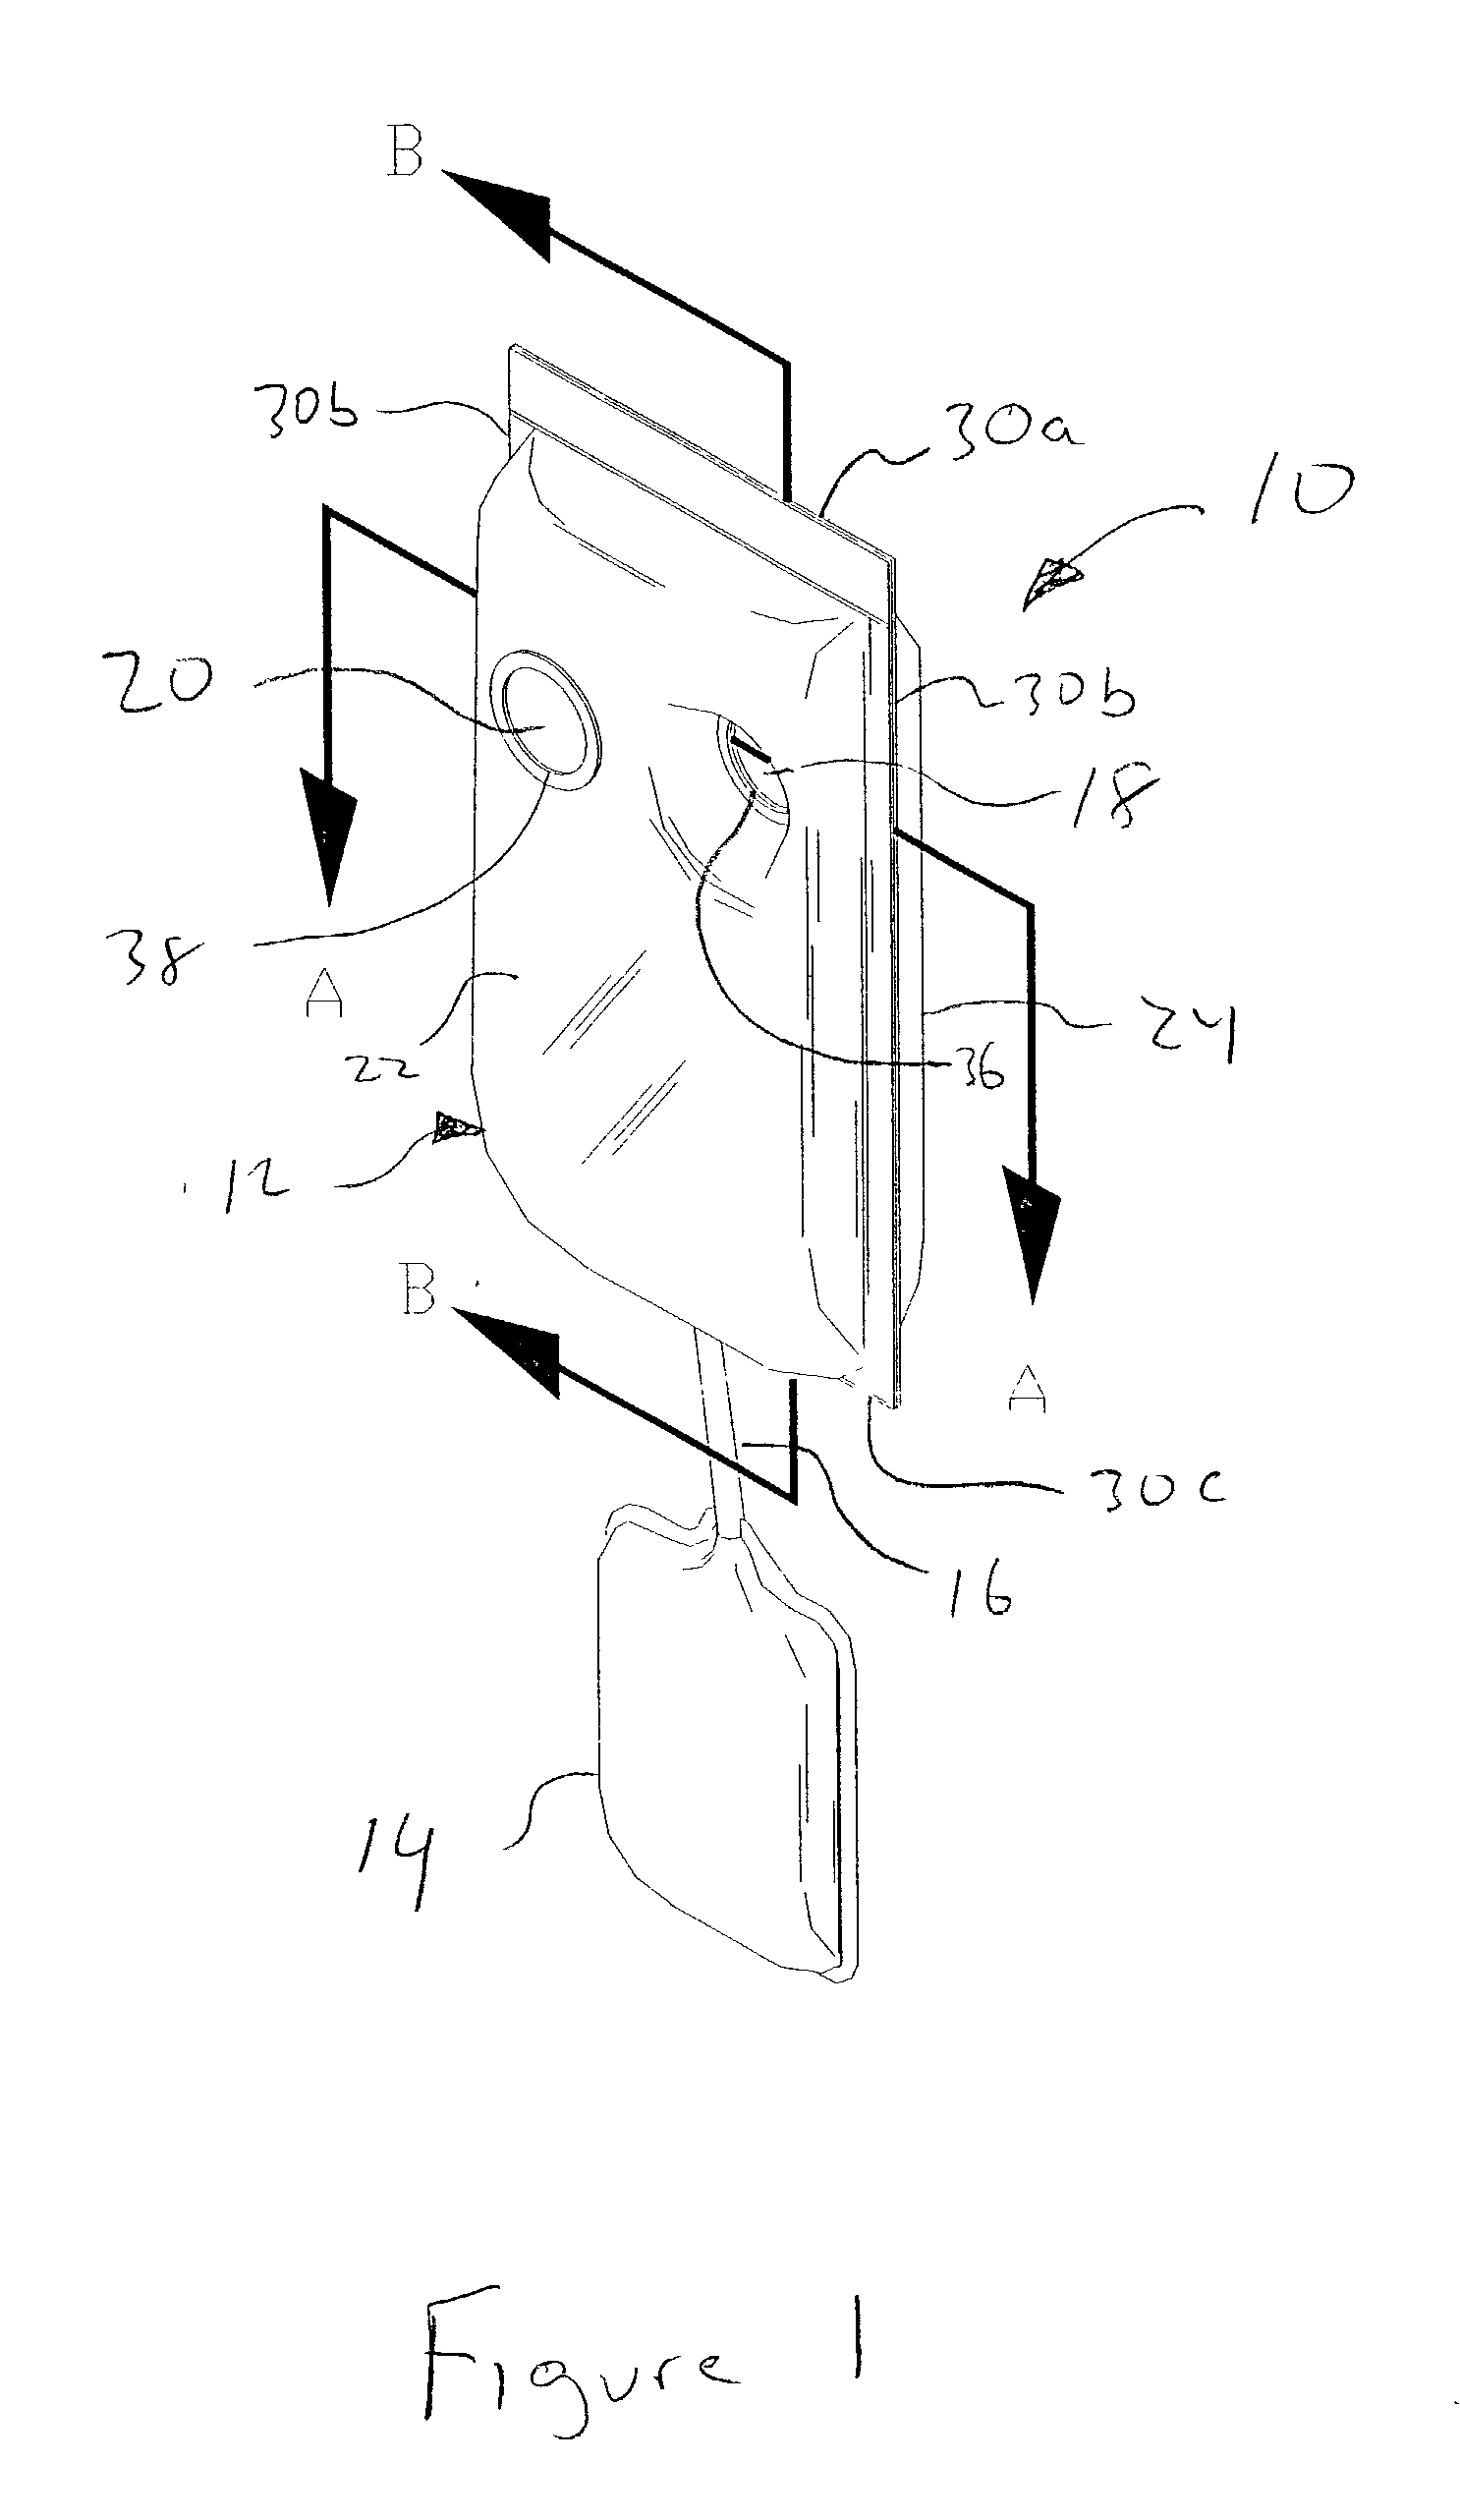 Apparatus to adapt a convective treatment system or device for cooling